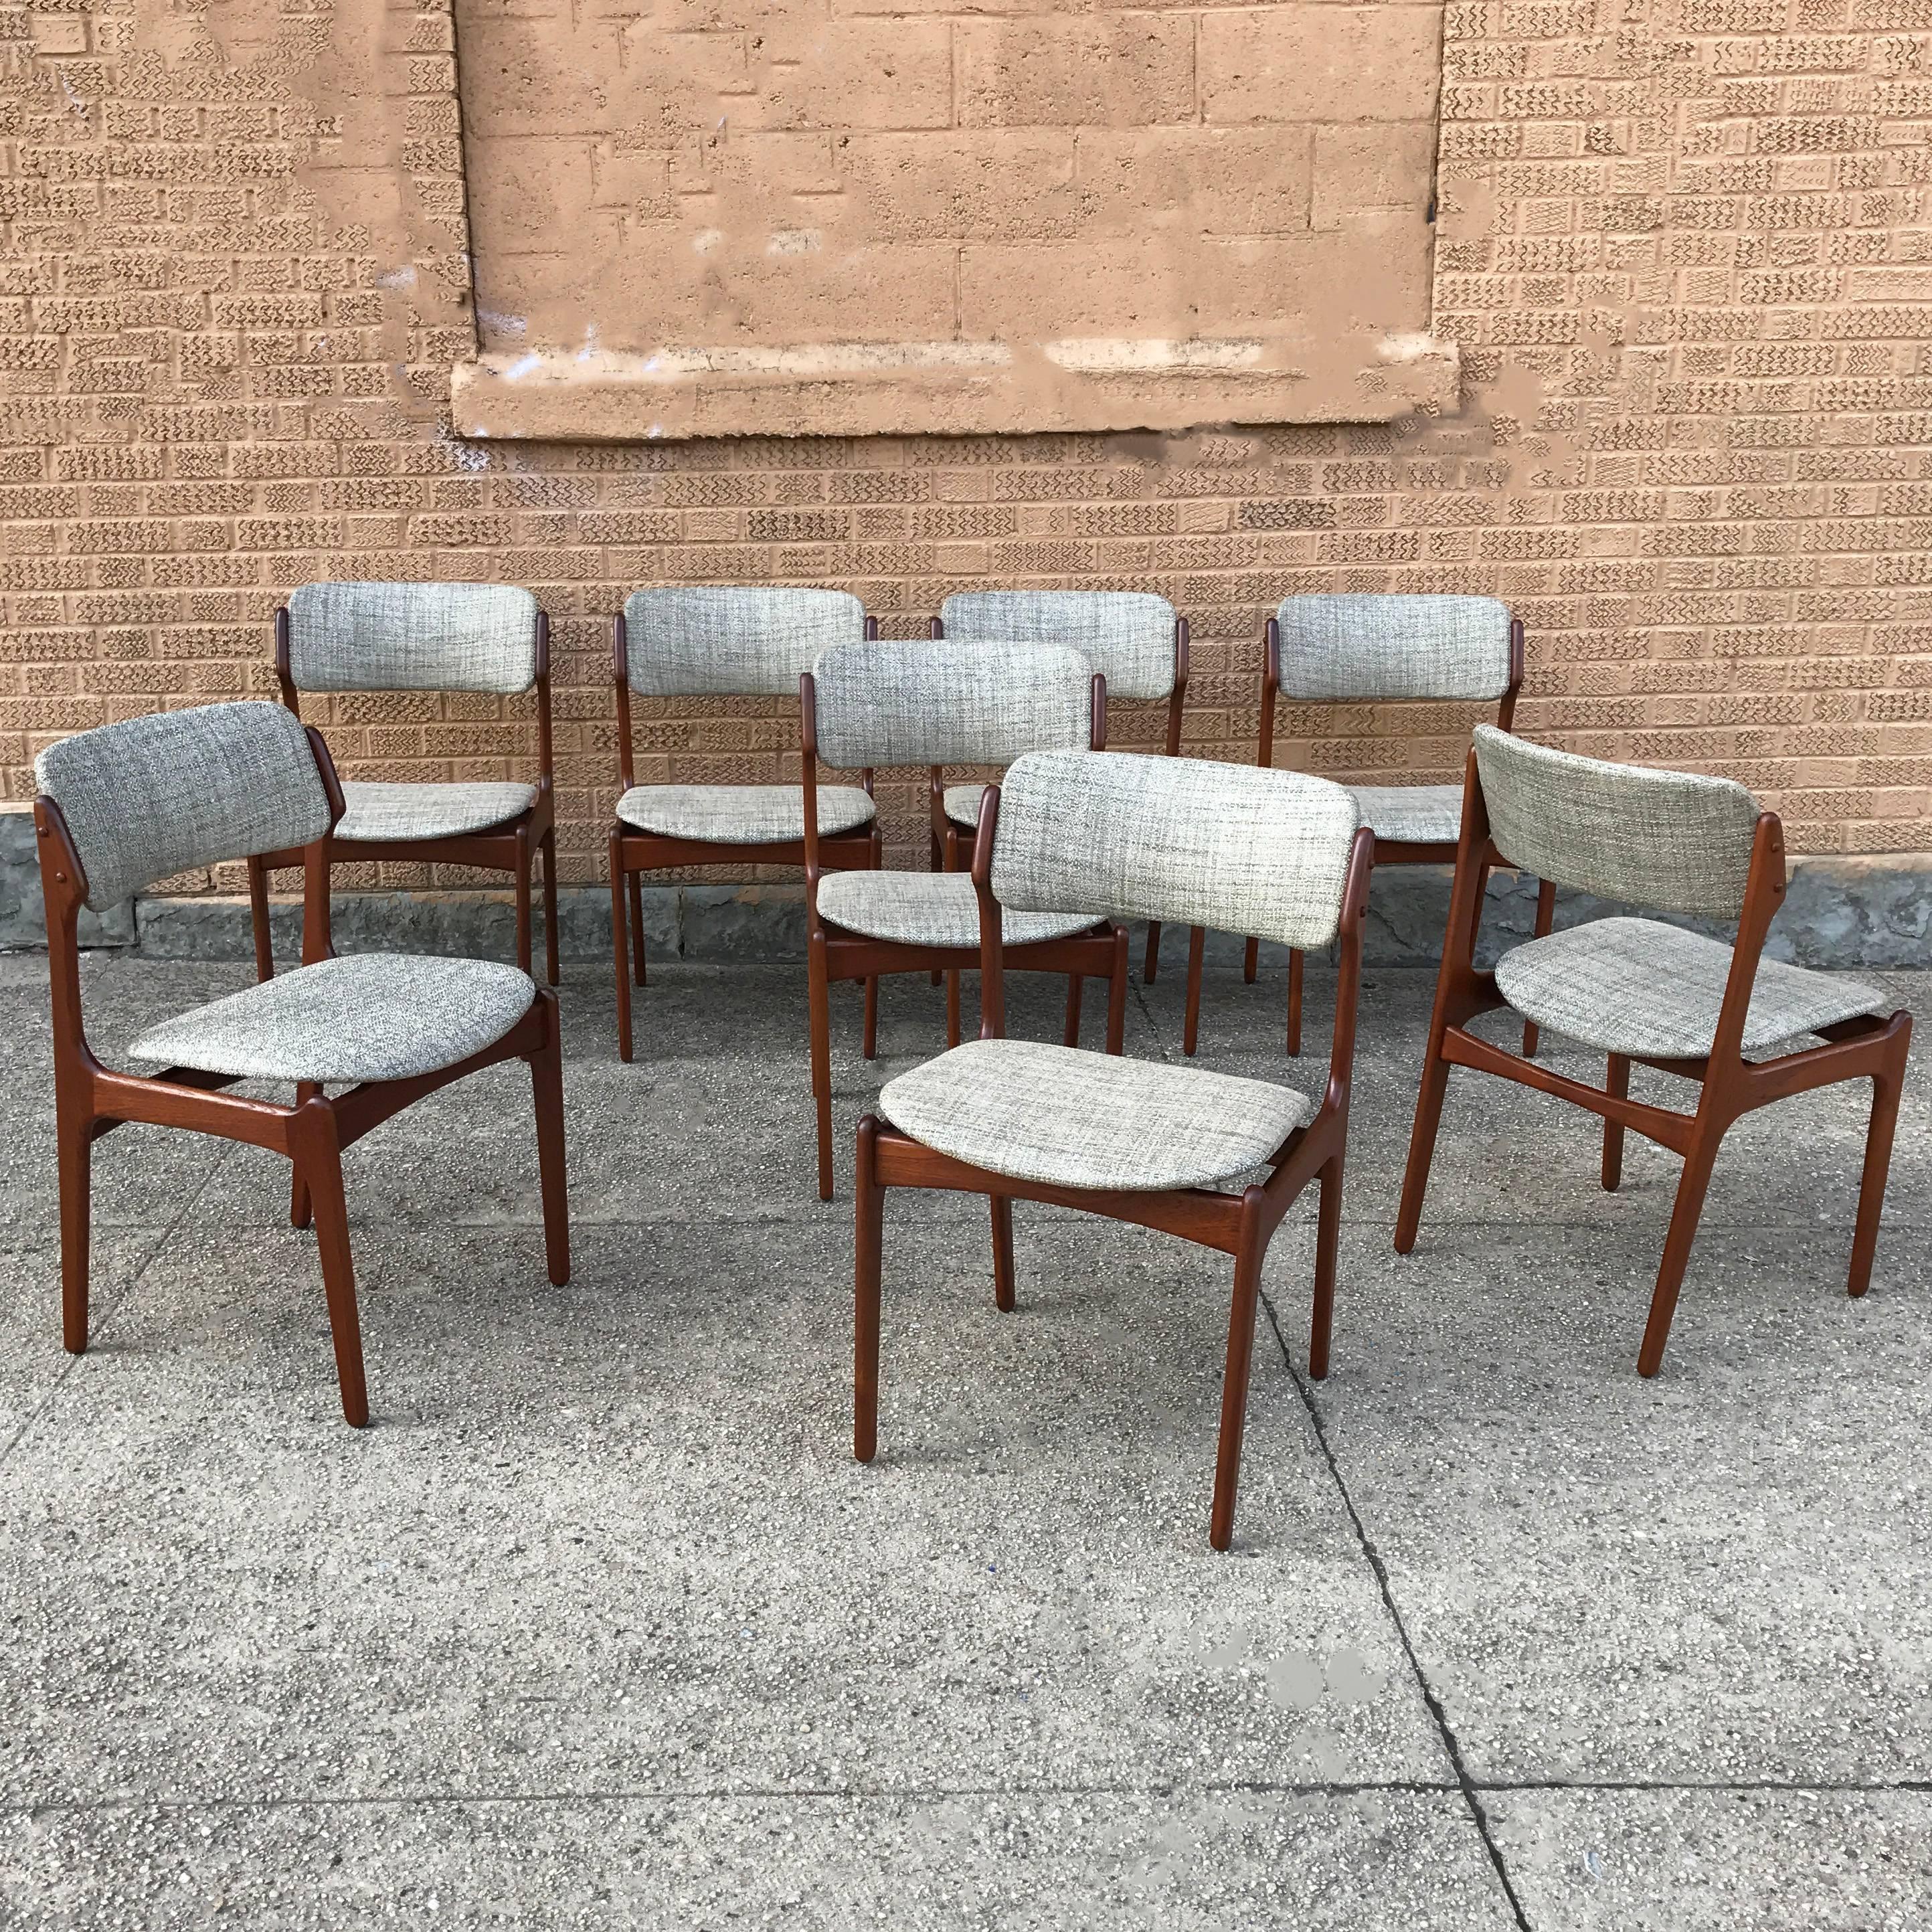 Set of eight, teak dining chairs by Erik Buck for O.D. Mobler are newly restored with seats and backs upholstered in grey blue tweed linen blend.